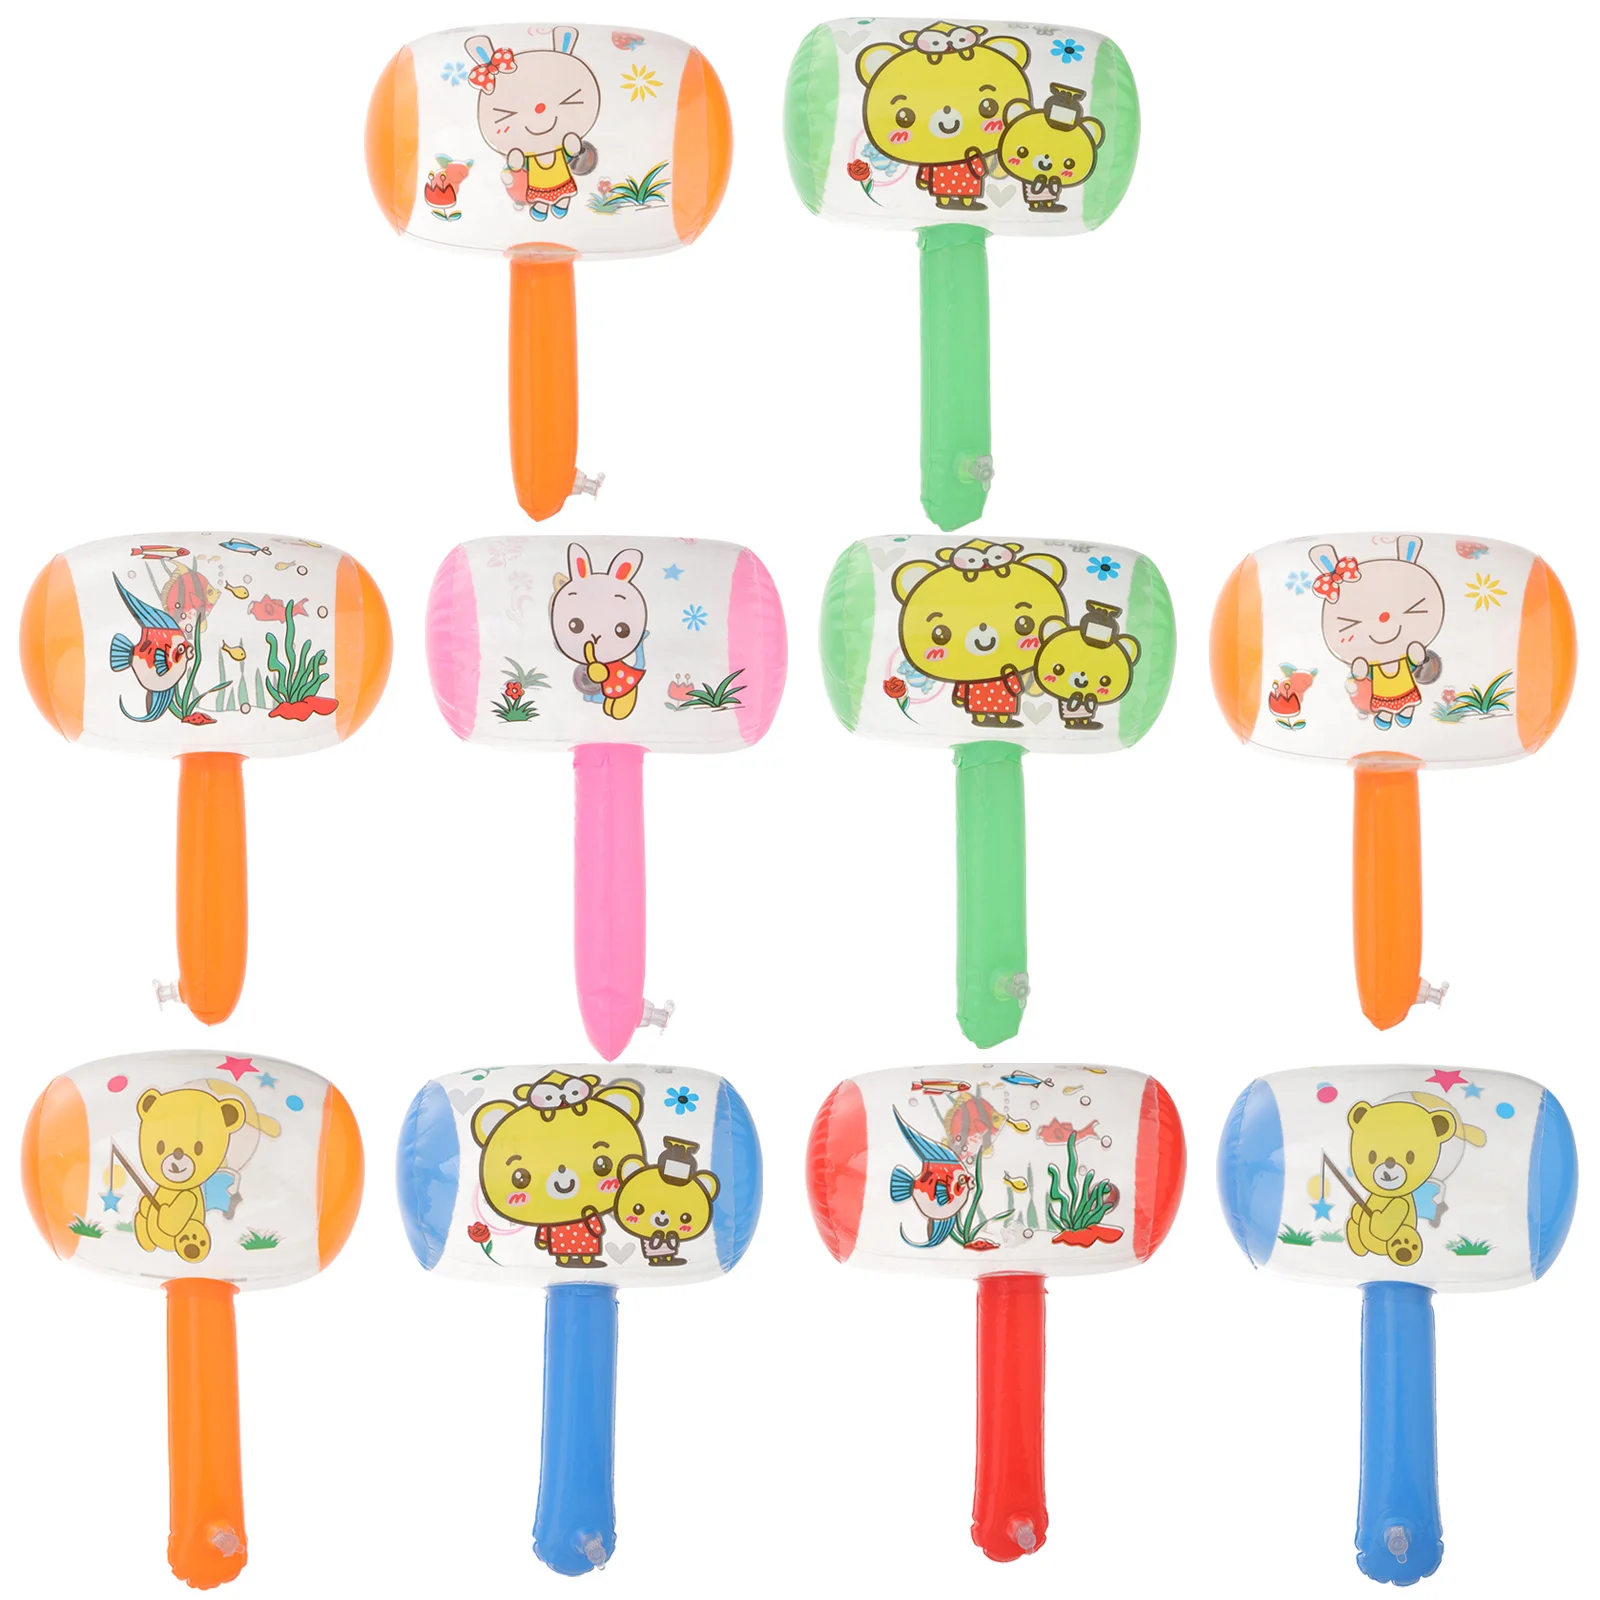 Toys Baby Hand Grip Toy Plastic Hammers Toys Kids Party Decorations  Construction Party Supplies Birthday Party Favors lovely party favors baby wooden toys musical gift little pirate whistle kids toys